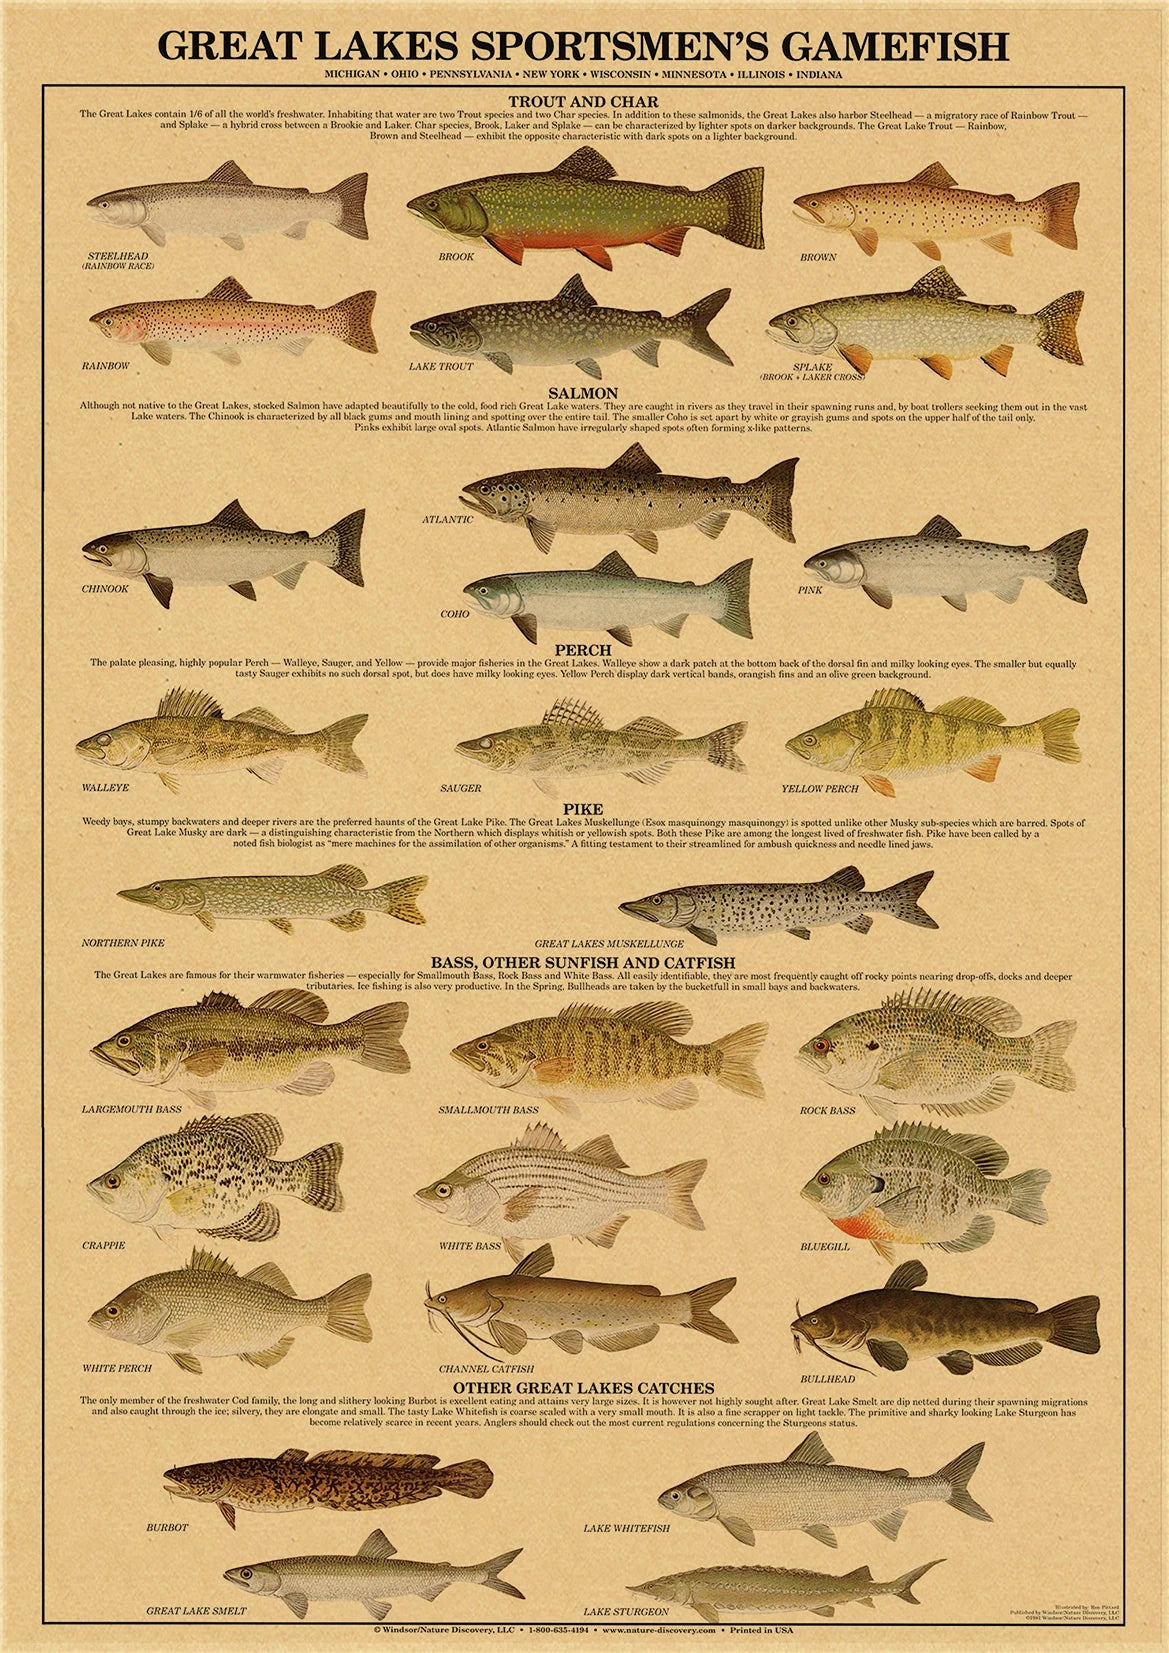 Insects Arthropodes Poster Marine Fishs Kraft Paper Prints DIY Vintage Home Room Bar Cafe Decor Aesthetic Art Wall Painting - niceart